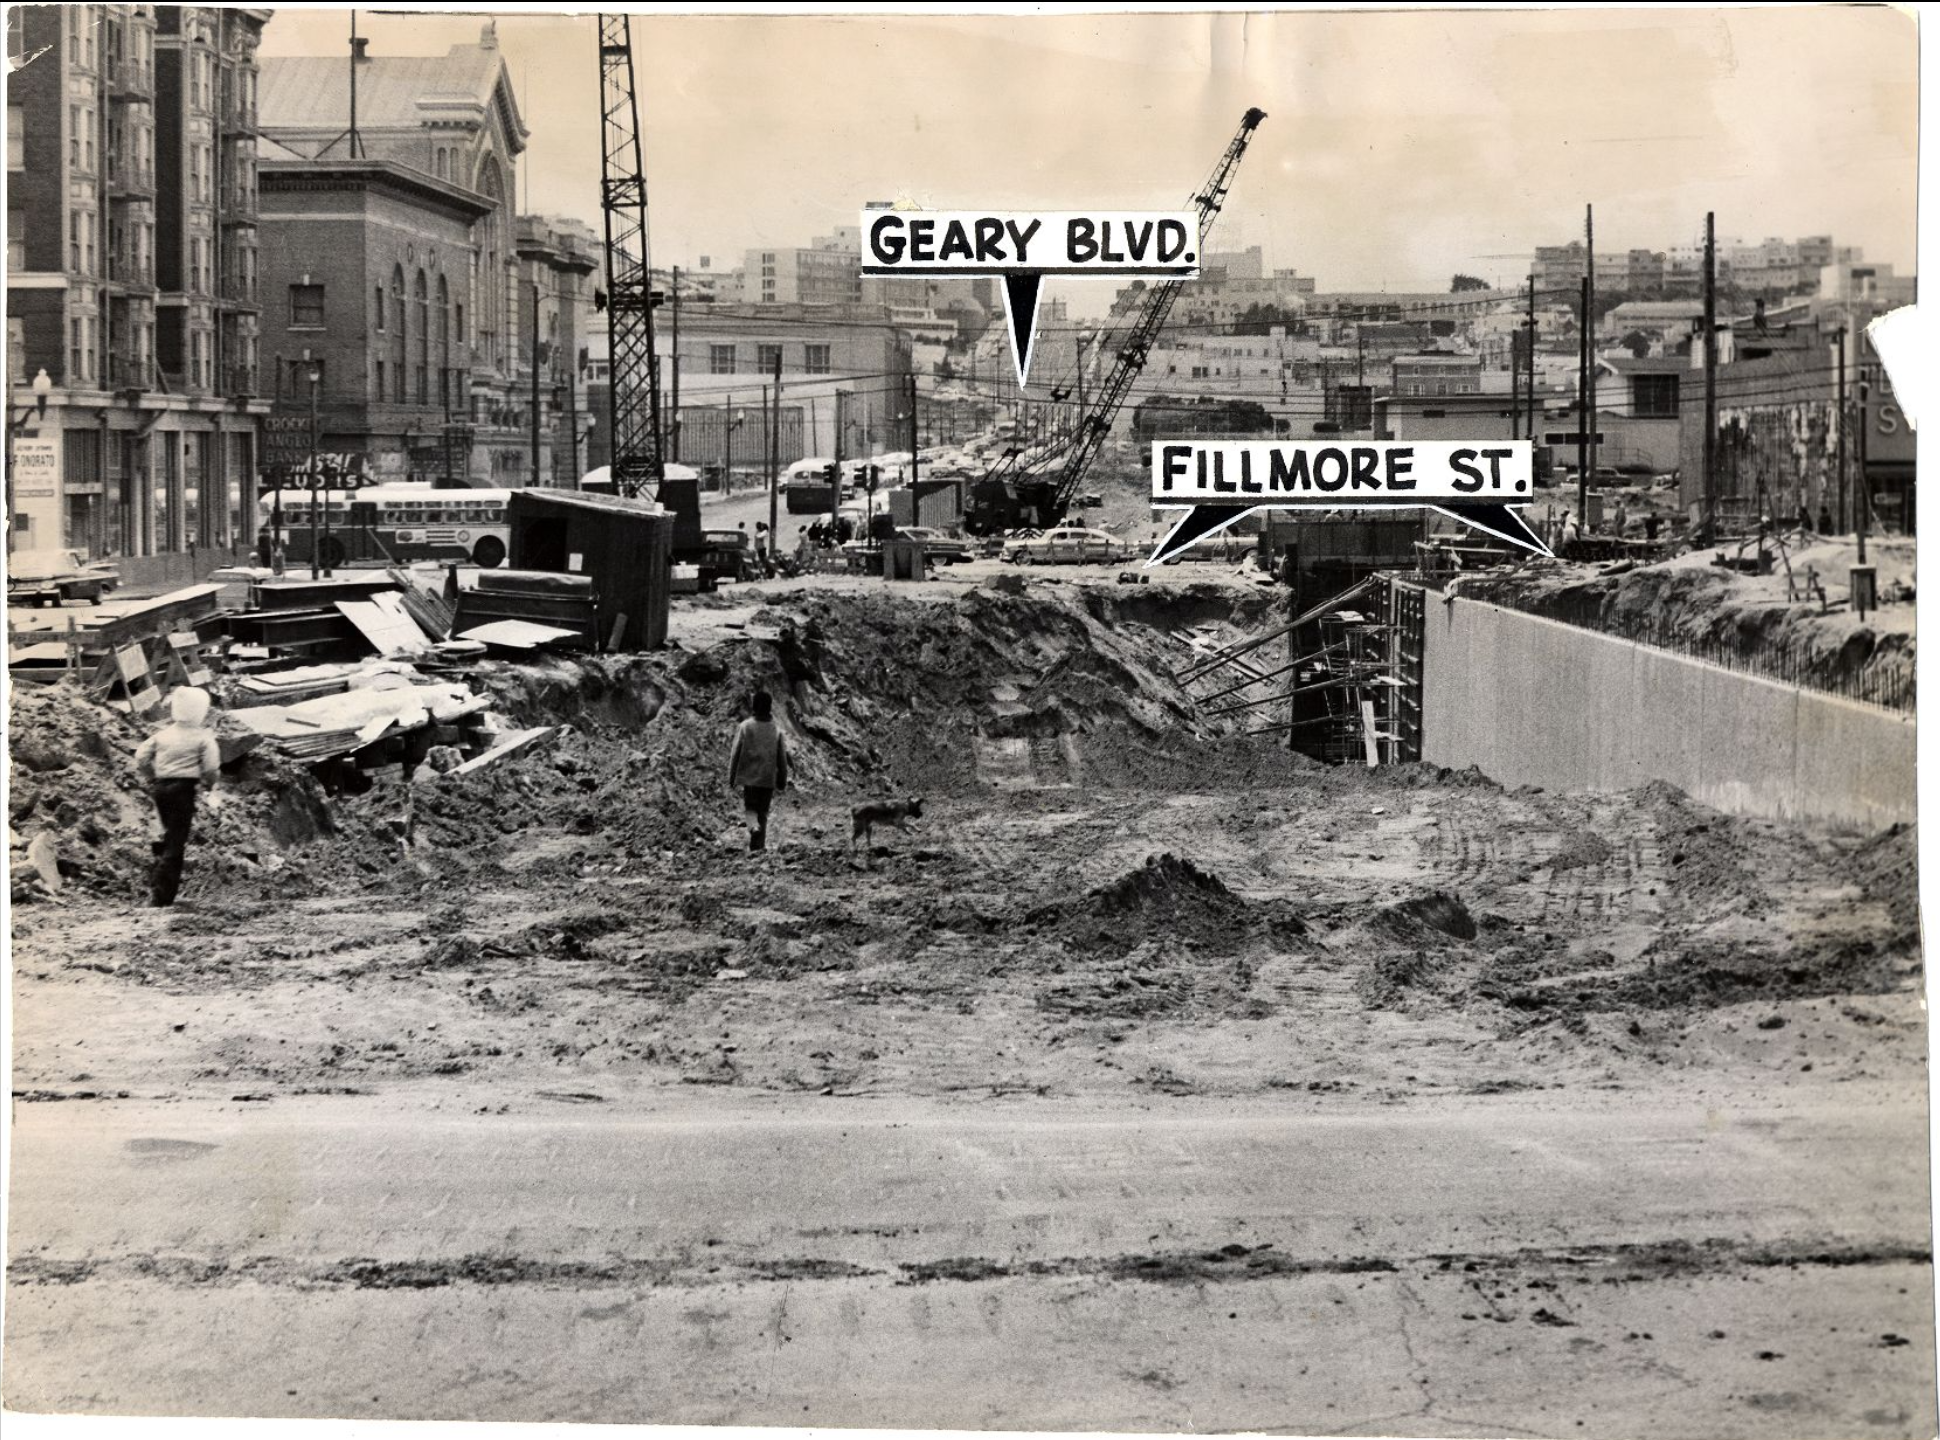 A black and white photo of an urban construction site with labeled streets, cranes, two people, and debris.